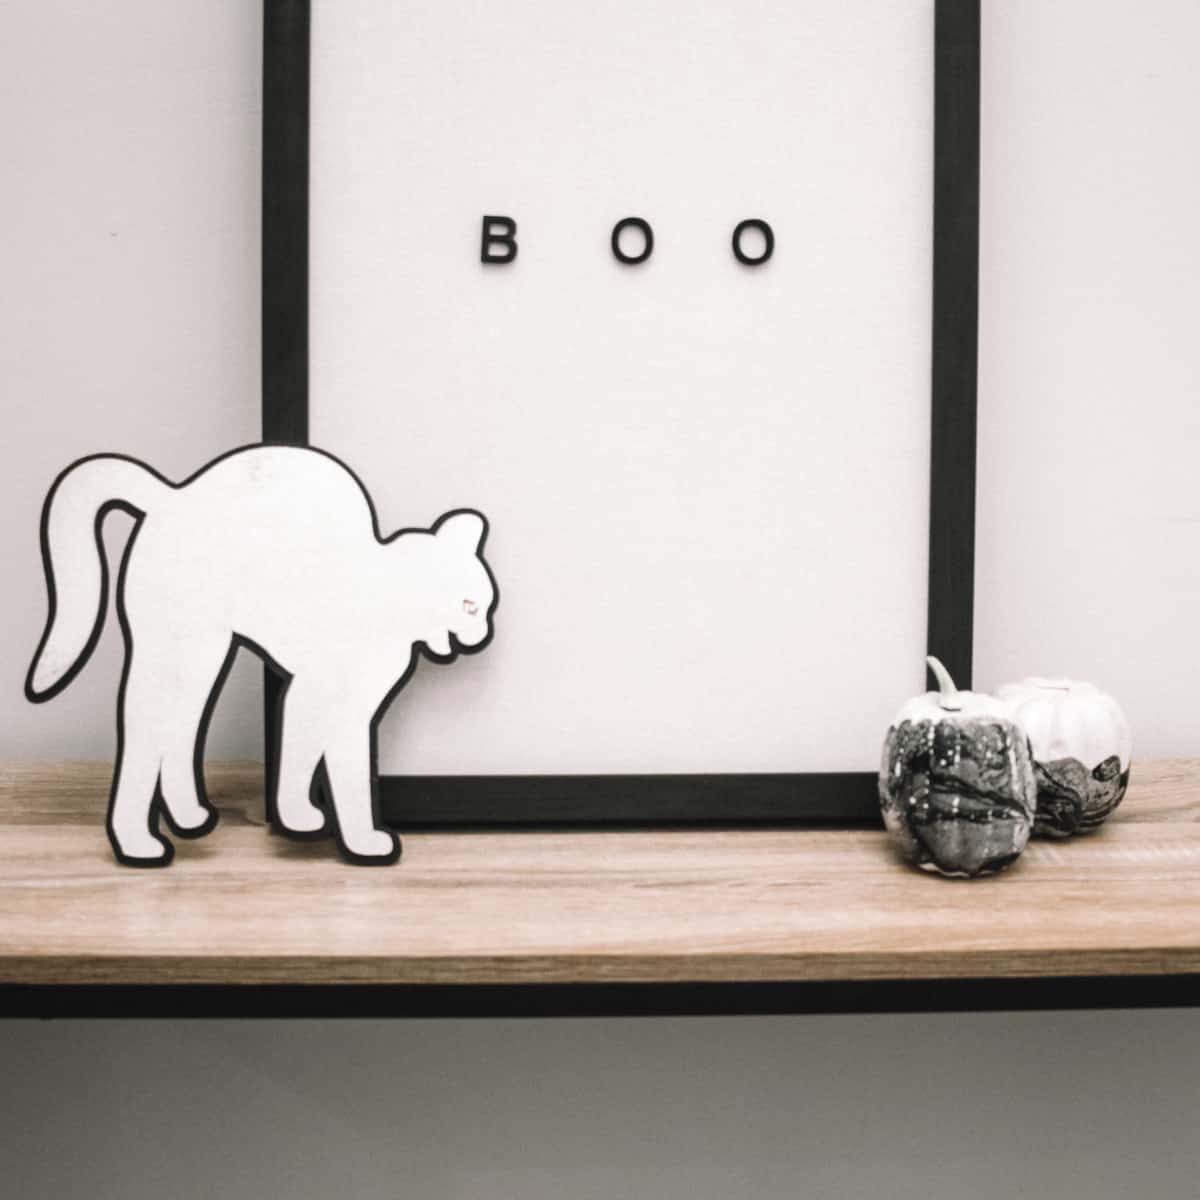 You can DIY your own halloween decor with this simple tutorial for a black cat chipboard sign!